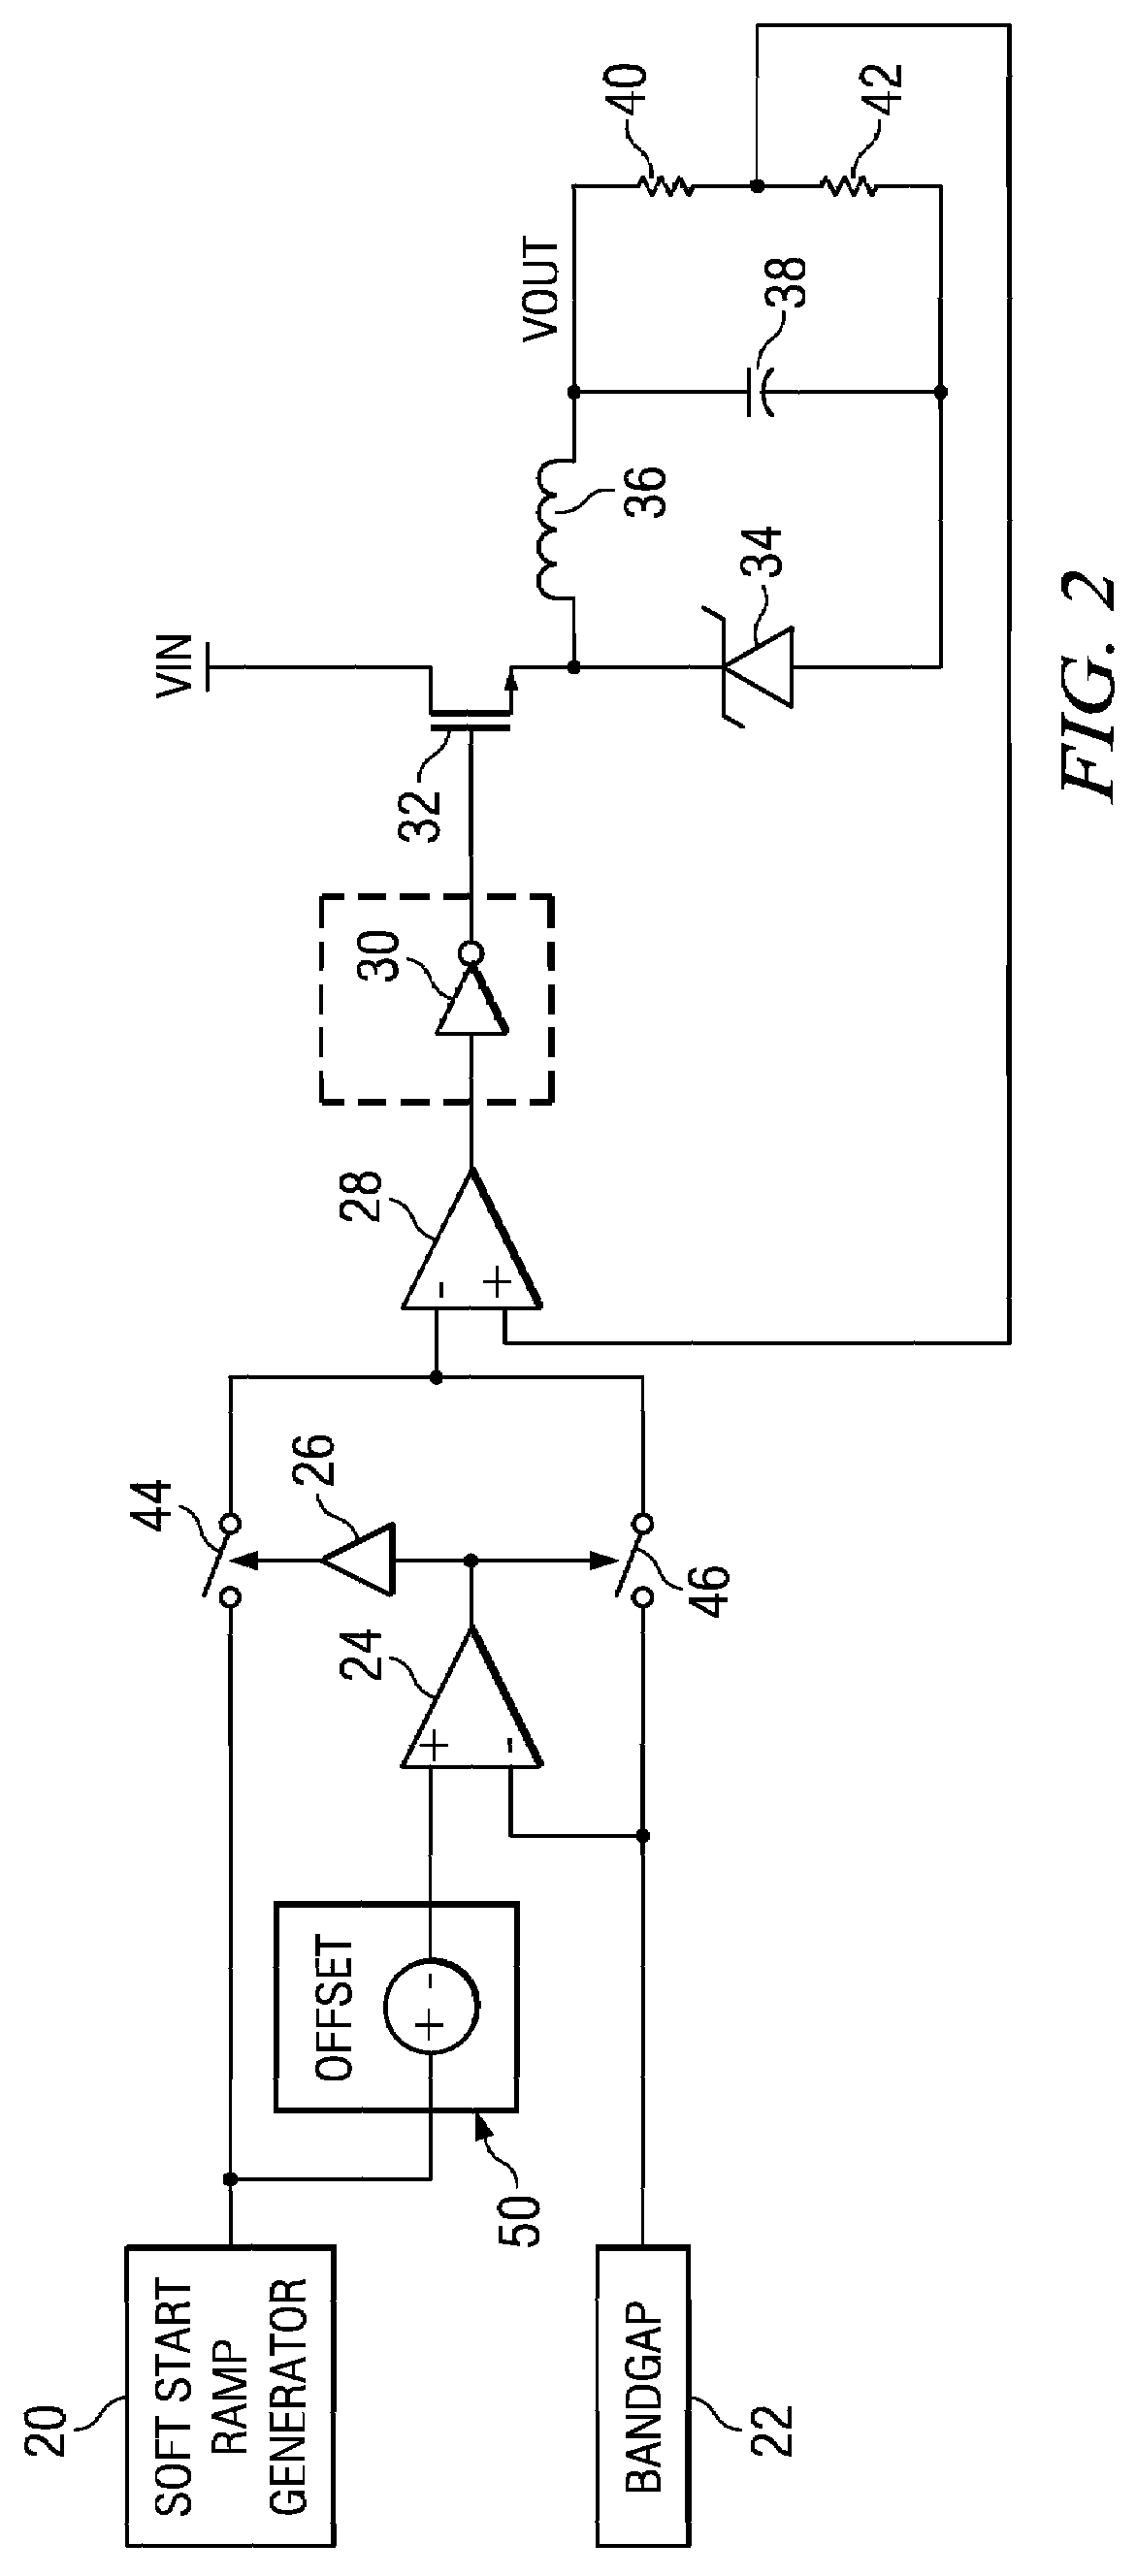 Reference voltage generator for reduced voltage overshoot in a switch mode regulator at the end of soft-start